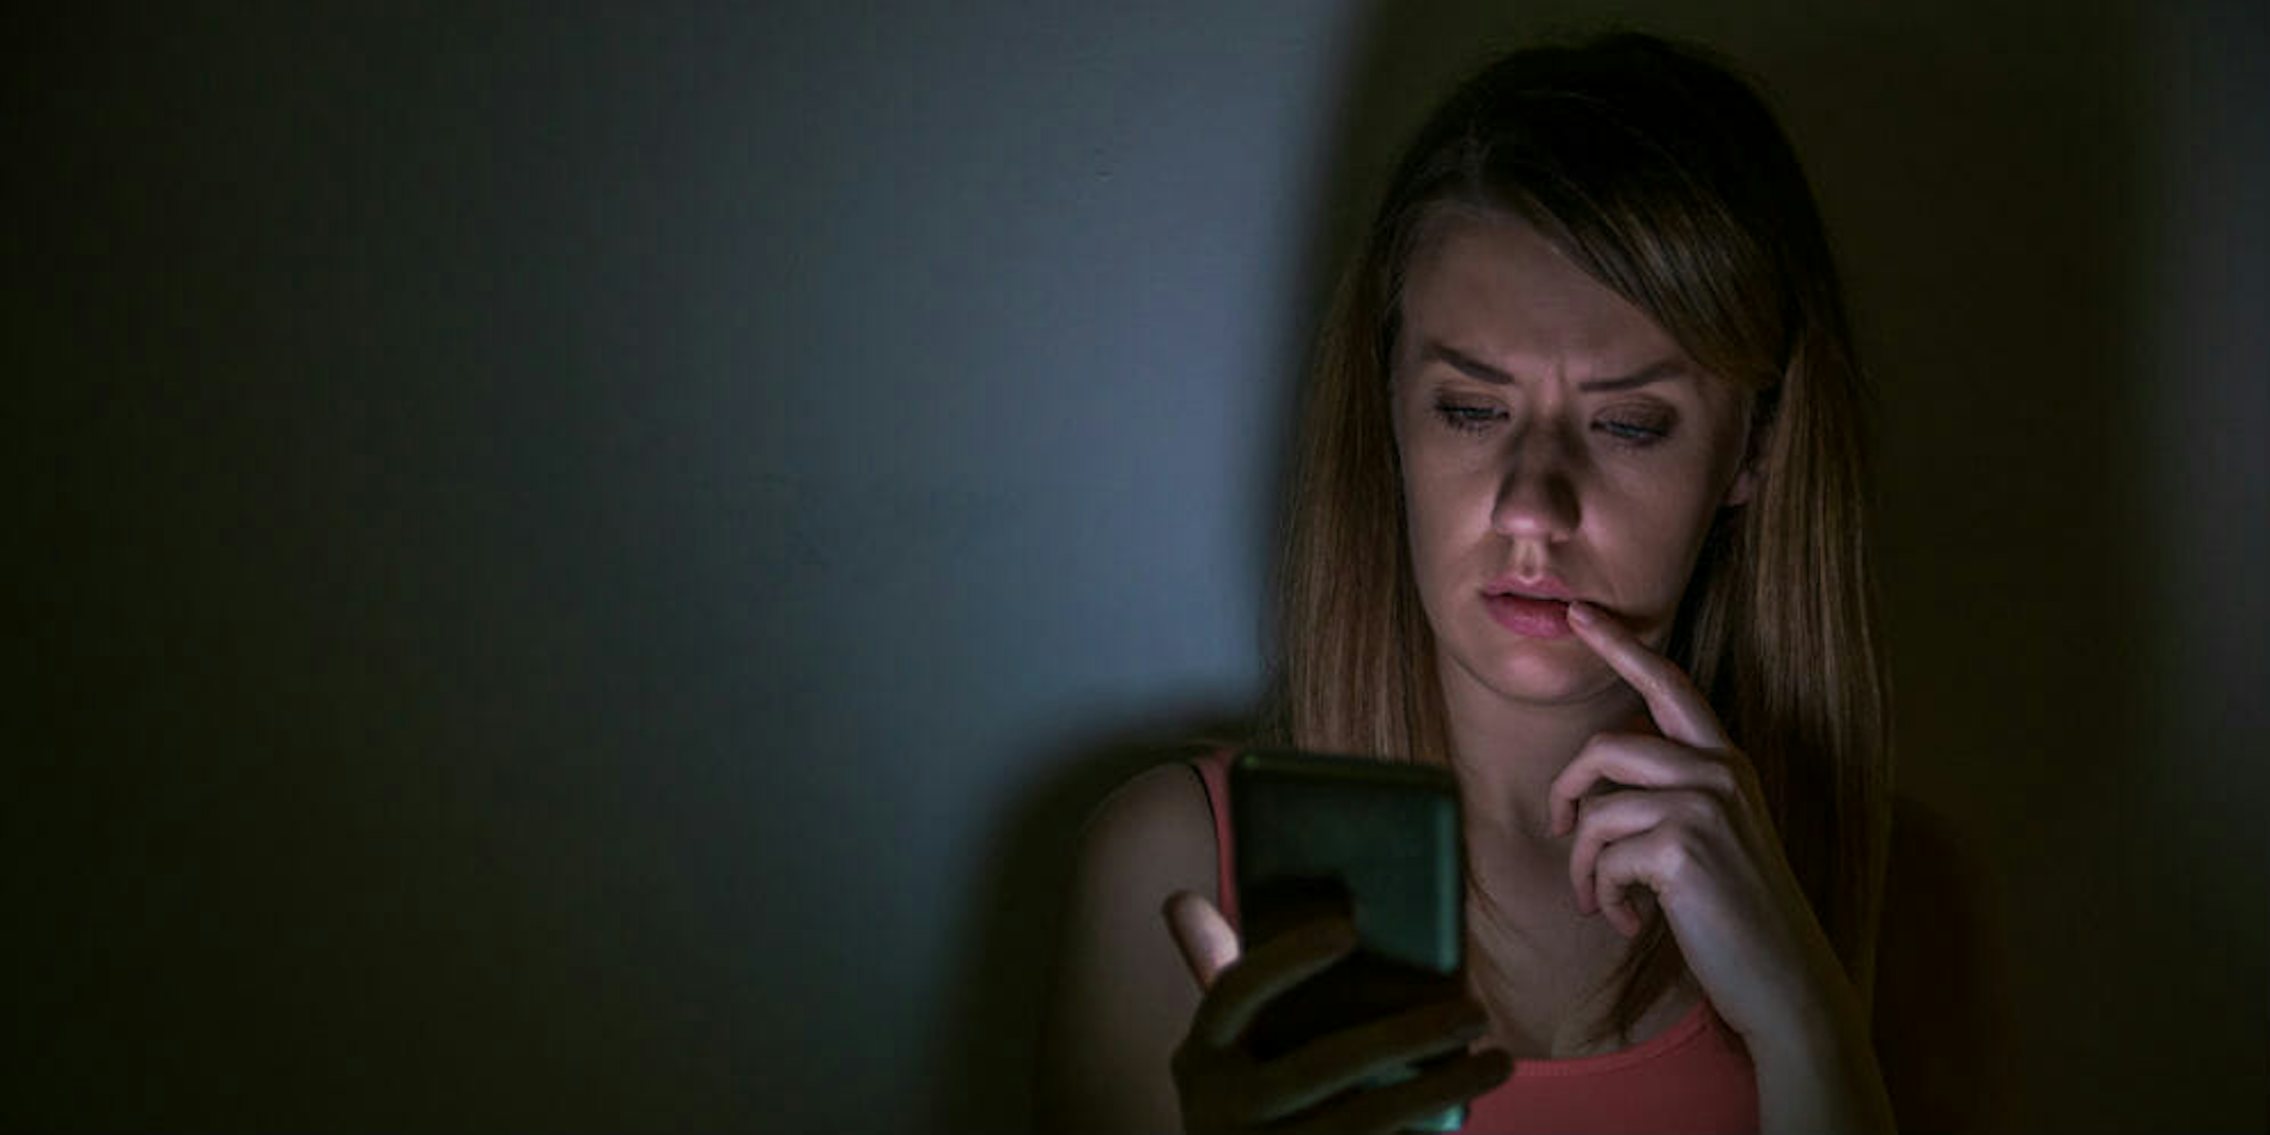 pew study : online social media harassment cell phone